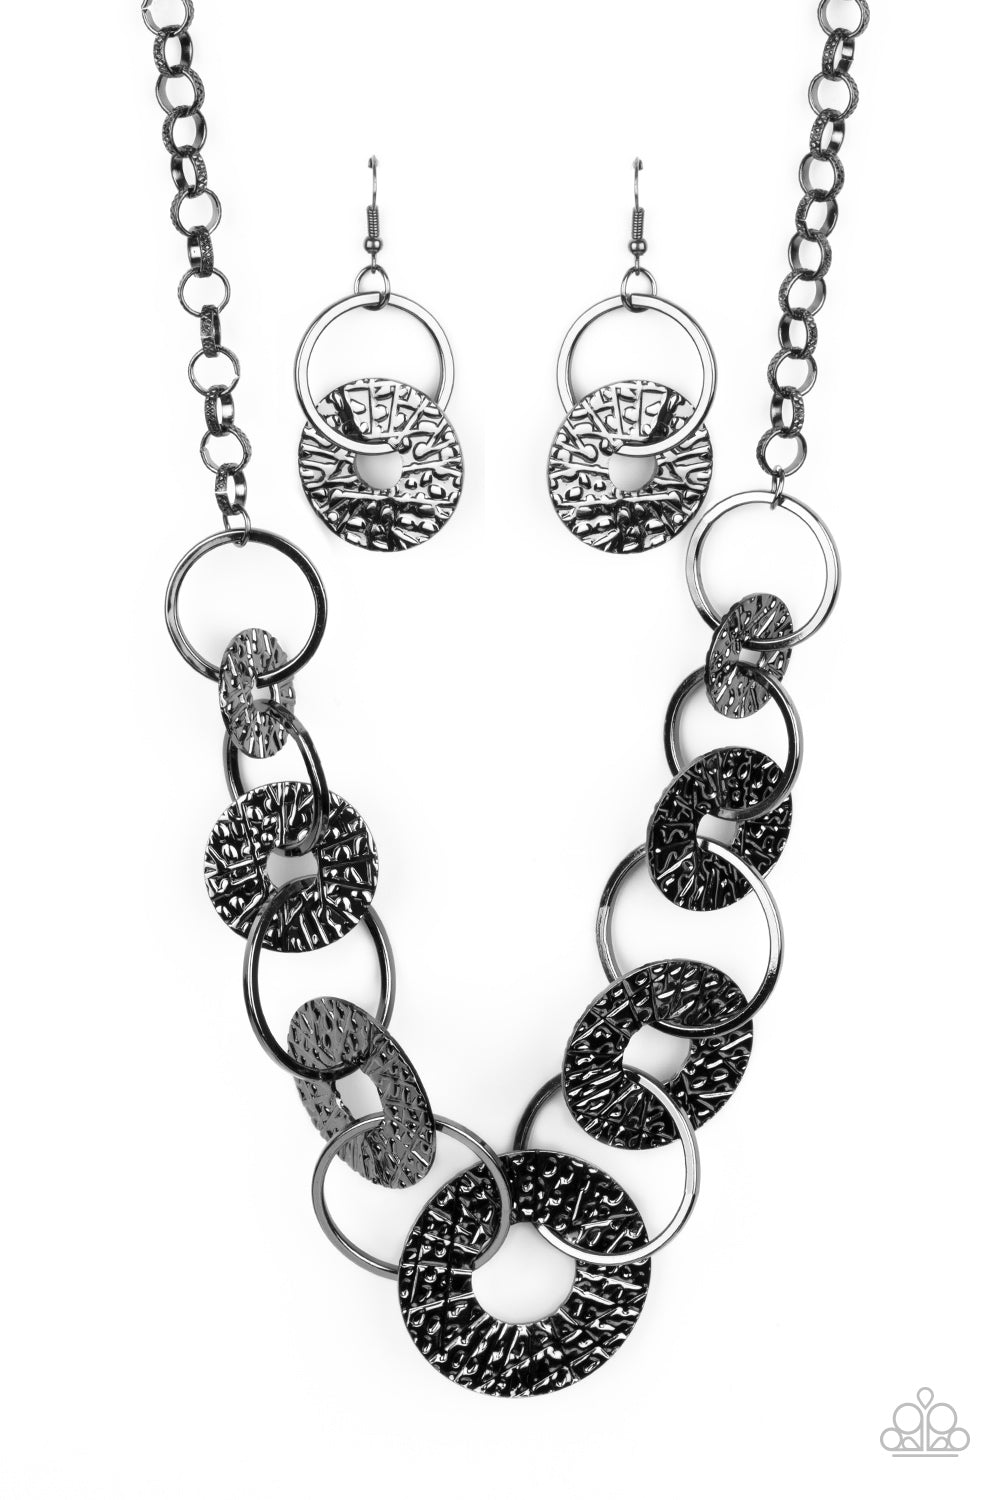 Paparazzi Industrial Envy - Black Necklace - A Finishing Touch Jewelry